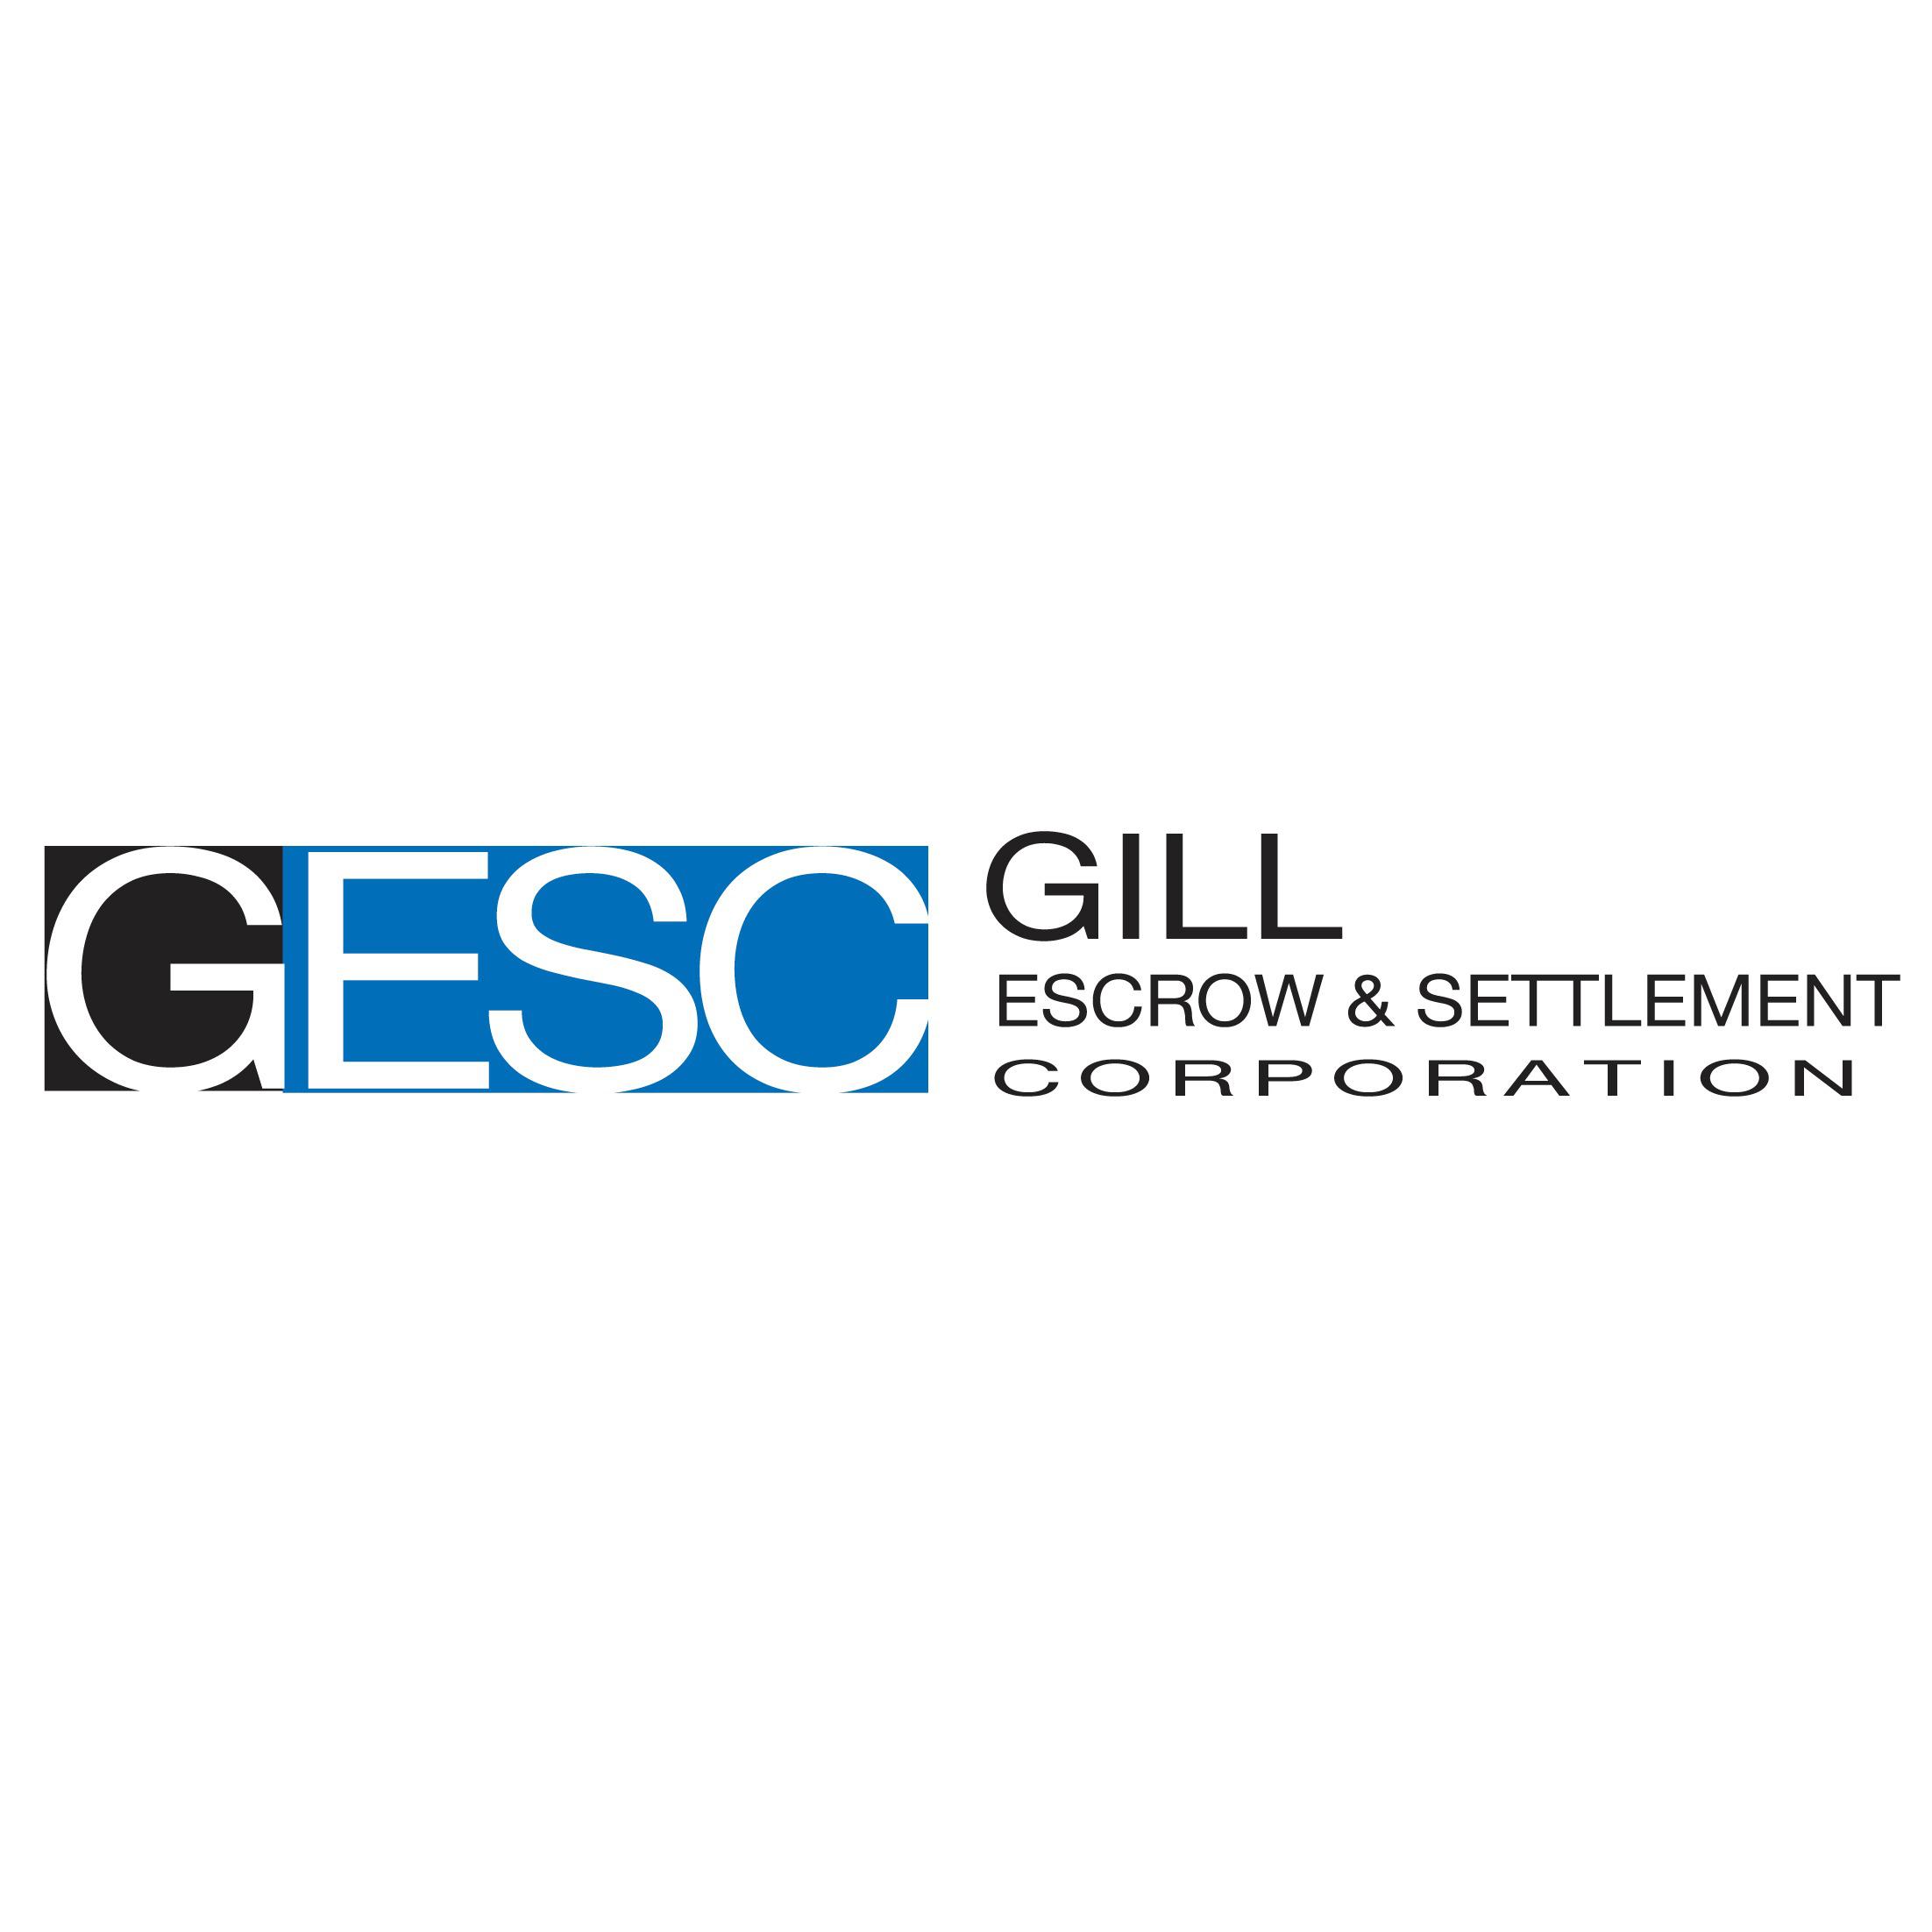 Gill Escrow and Settlement Corporation - Goshen, NY 10924 - (845)294-6972 | ShowMeLocal.com